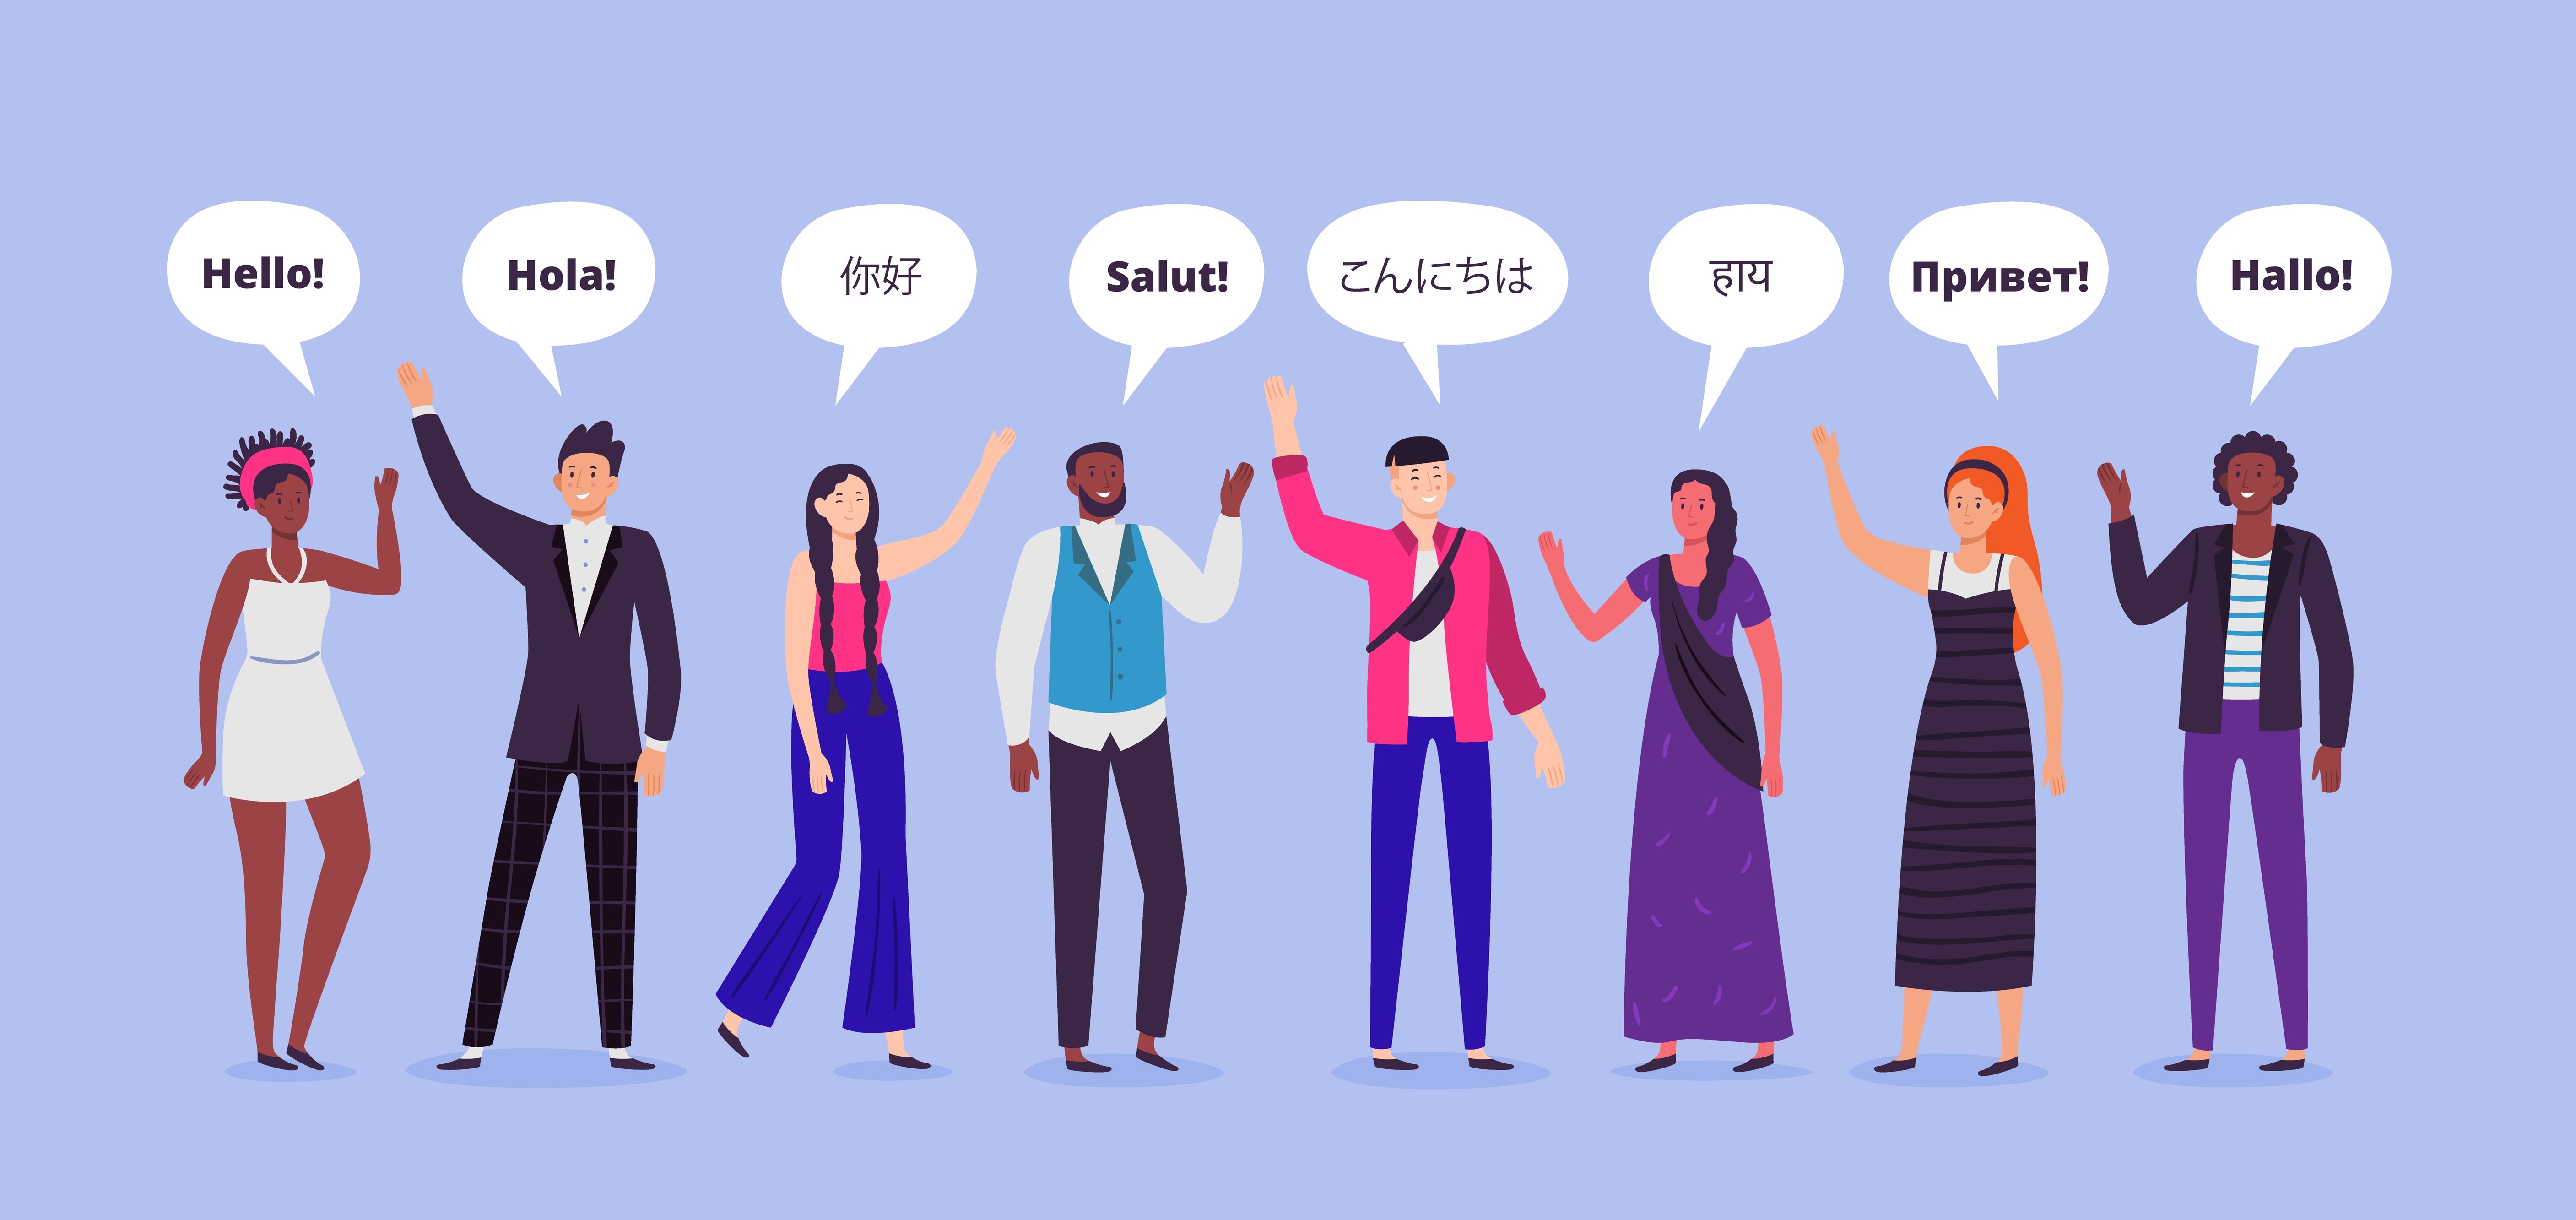 Cartoon illustration of eight people with speech bubbles saying "Hello" in eight different languages.